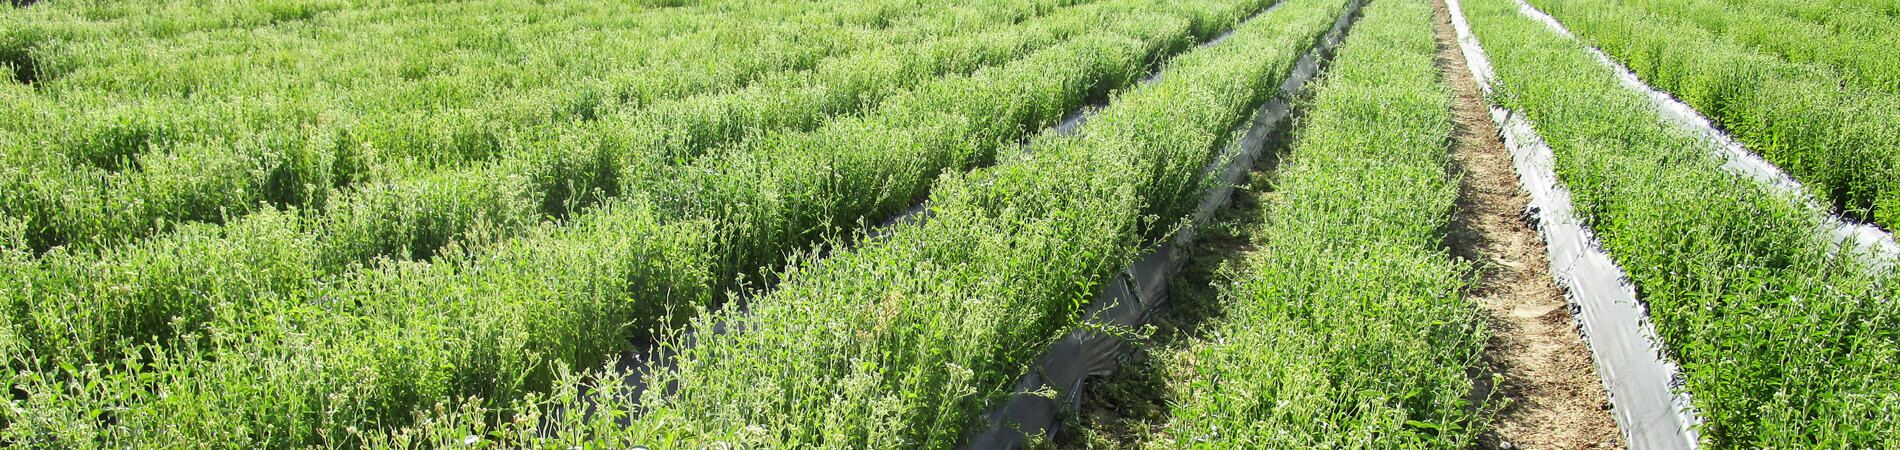 Stevia cultivation field plantation in Portugal...